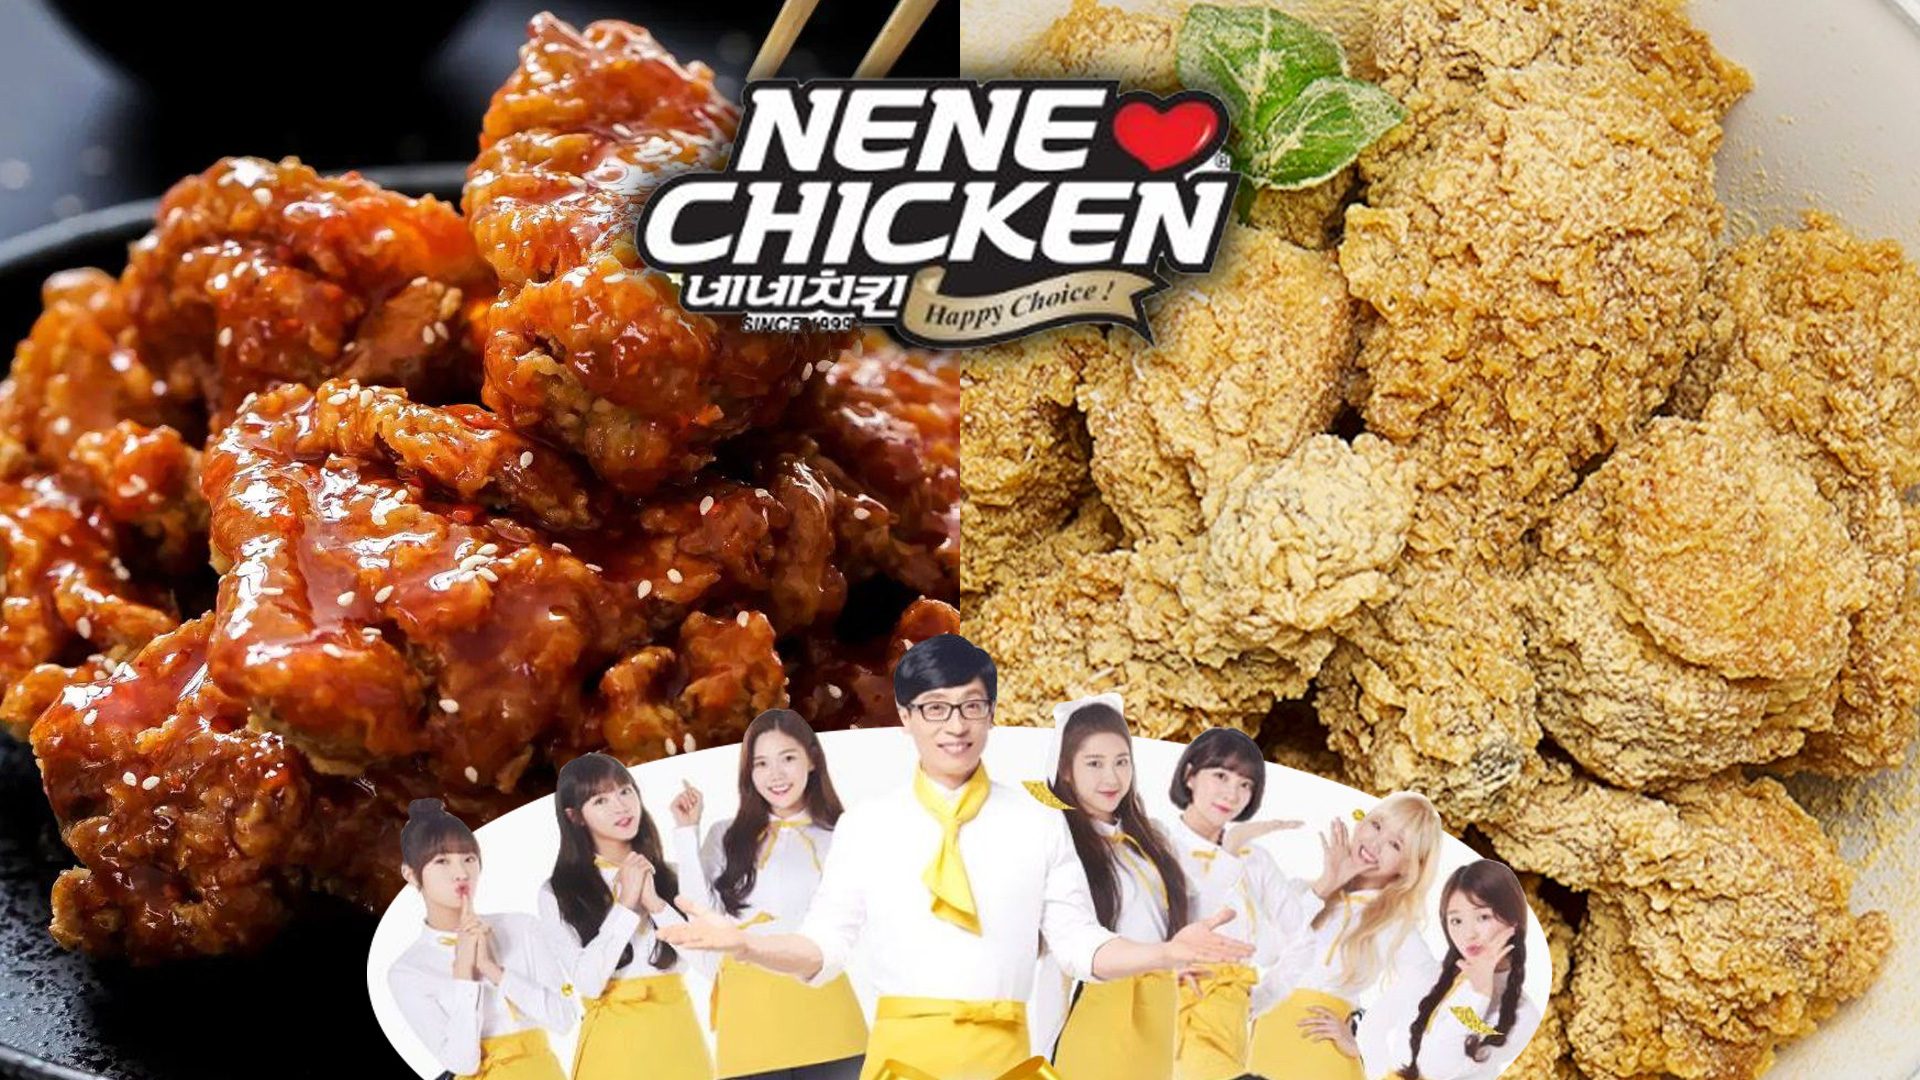 Frying soon! What to expect from NeNe Chicken’s 1st Metro Manila branch